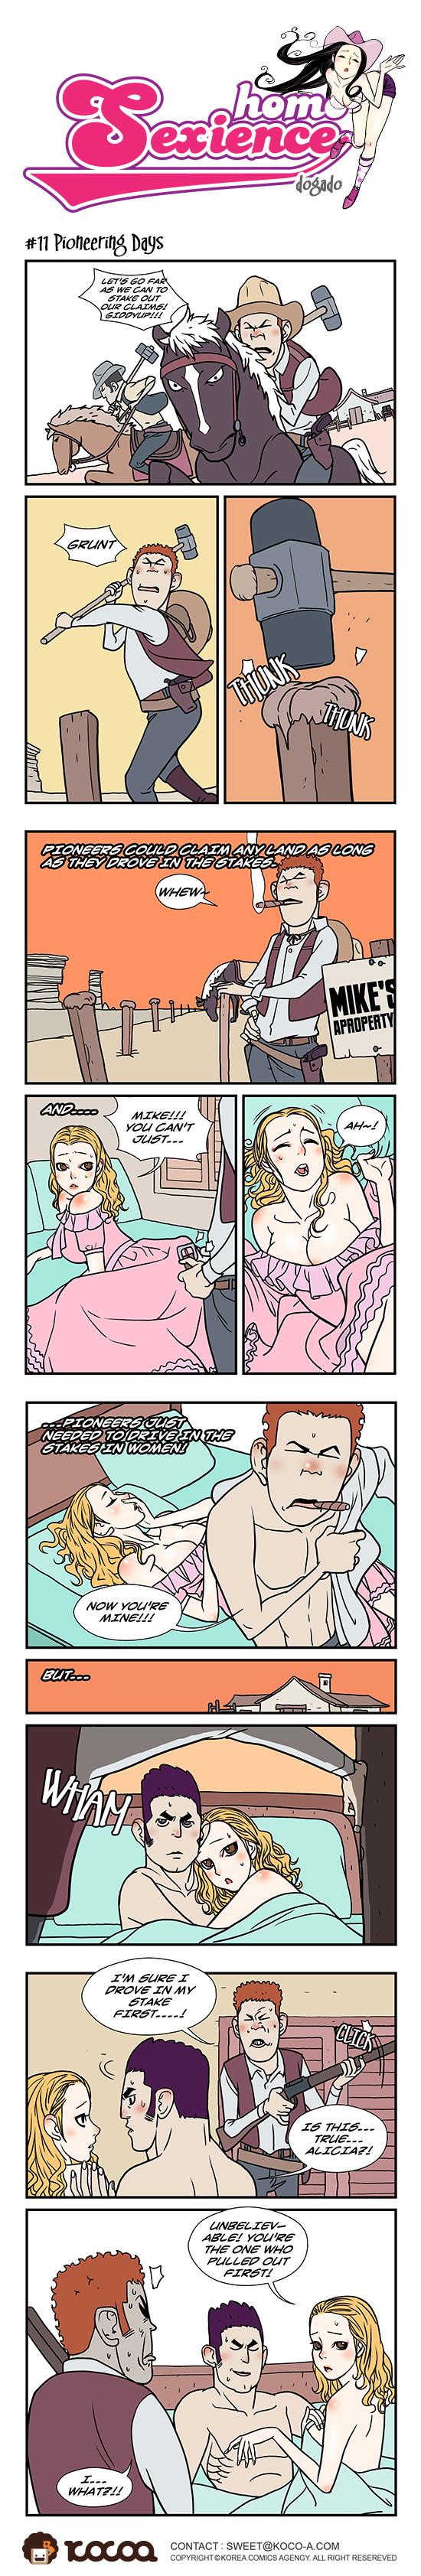 With Homo Sexience Wife - Page 11